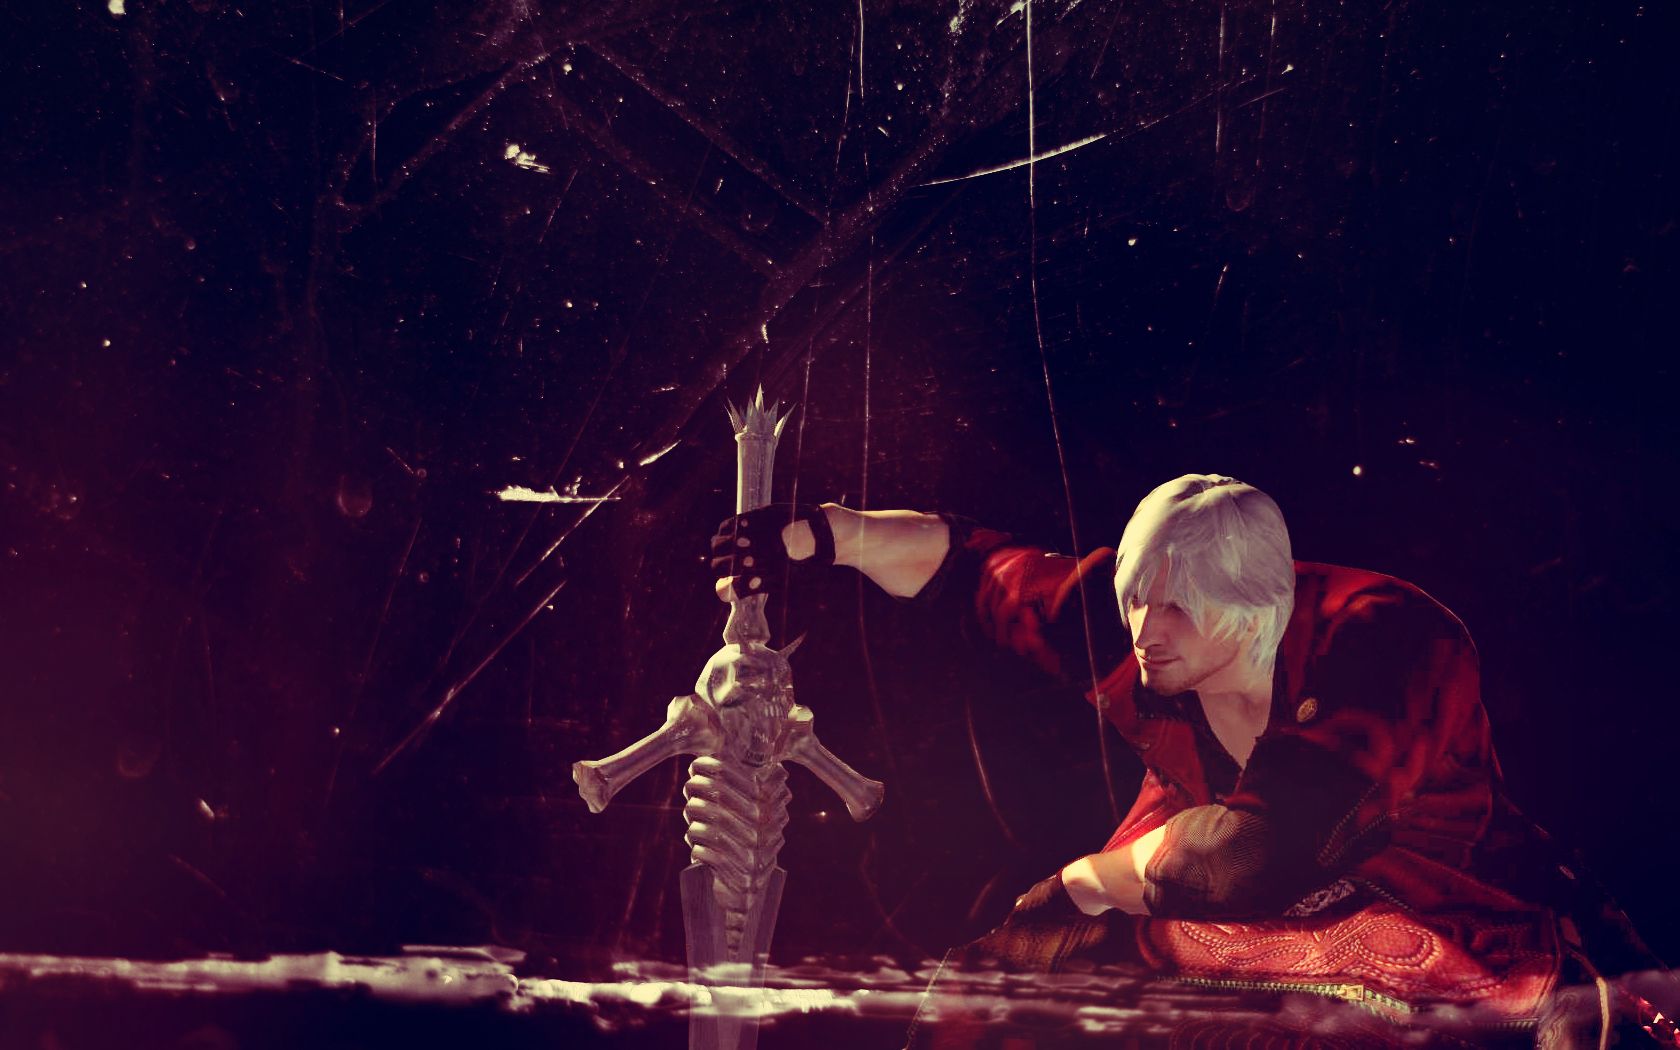 Devil May Cry 4 Wallpaper 4 by igotgame1075 on DeviantArt